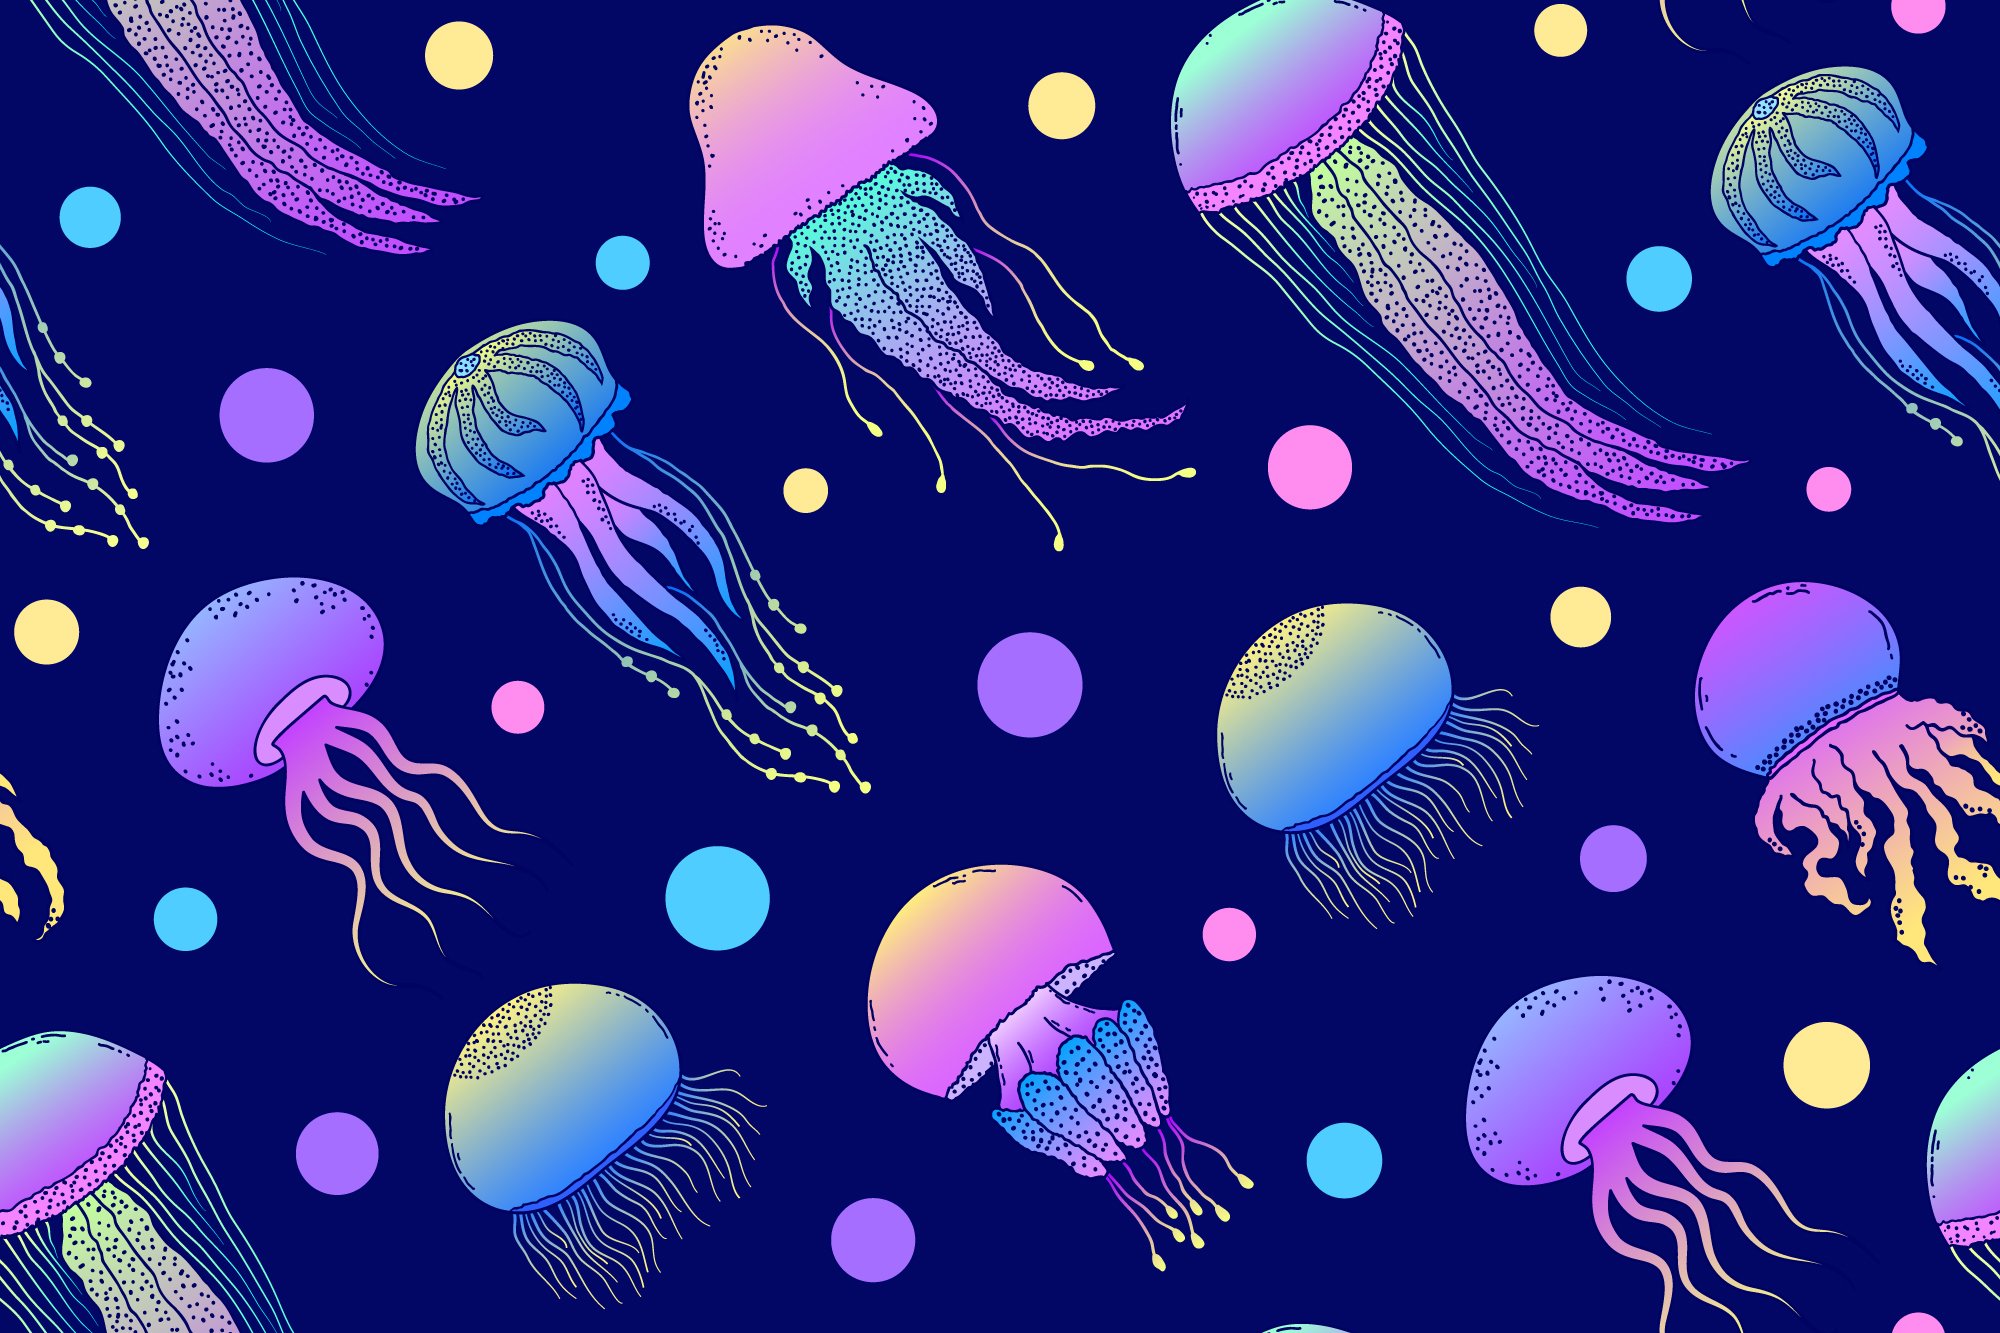 So colorful jellyfidhes in the purple background.